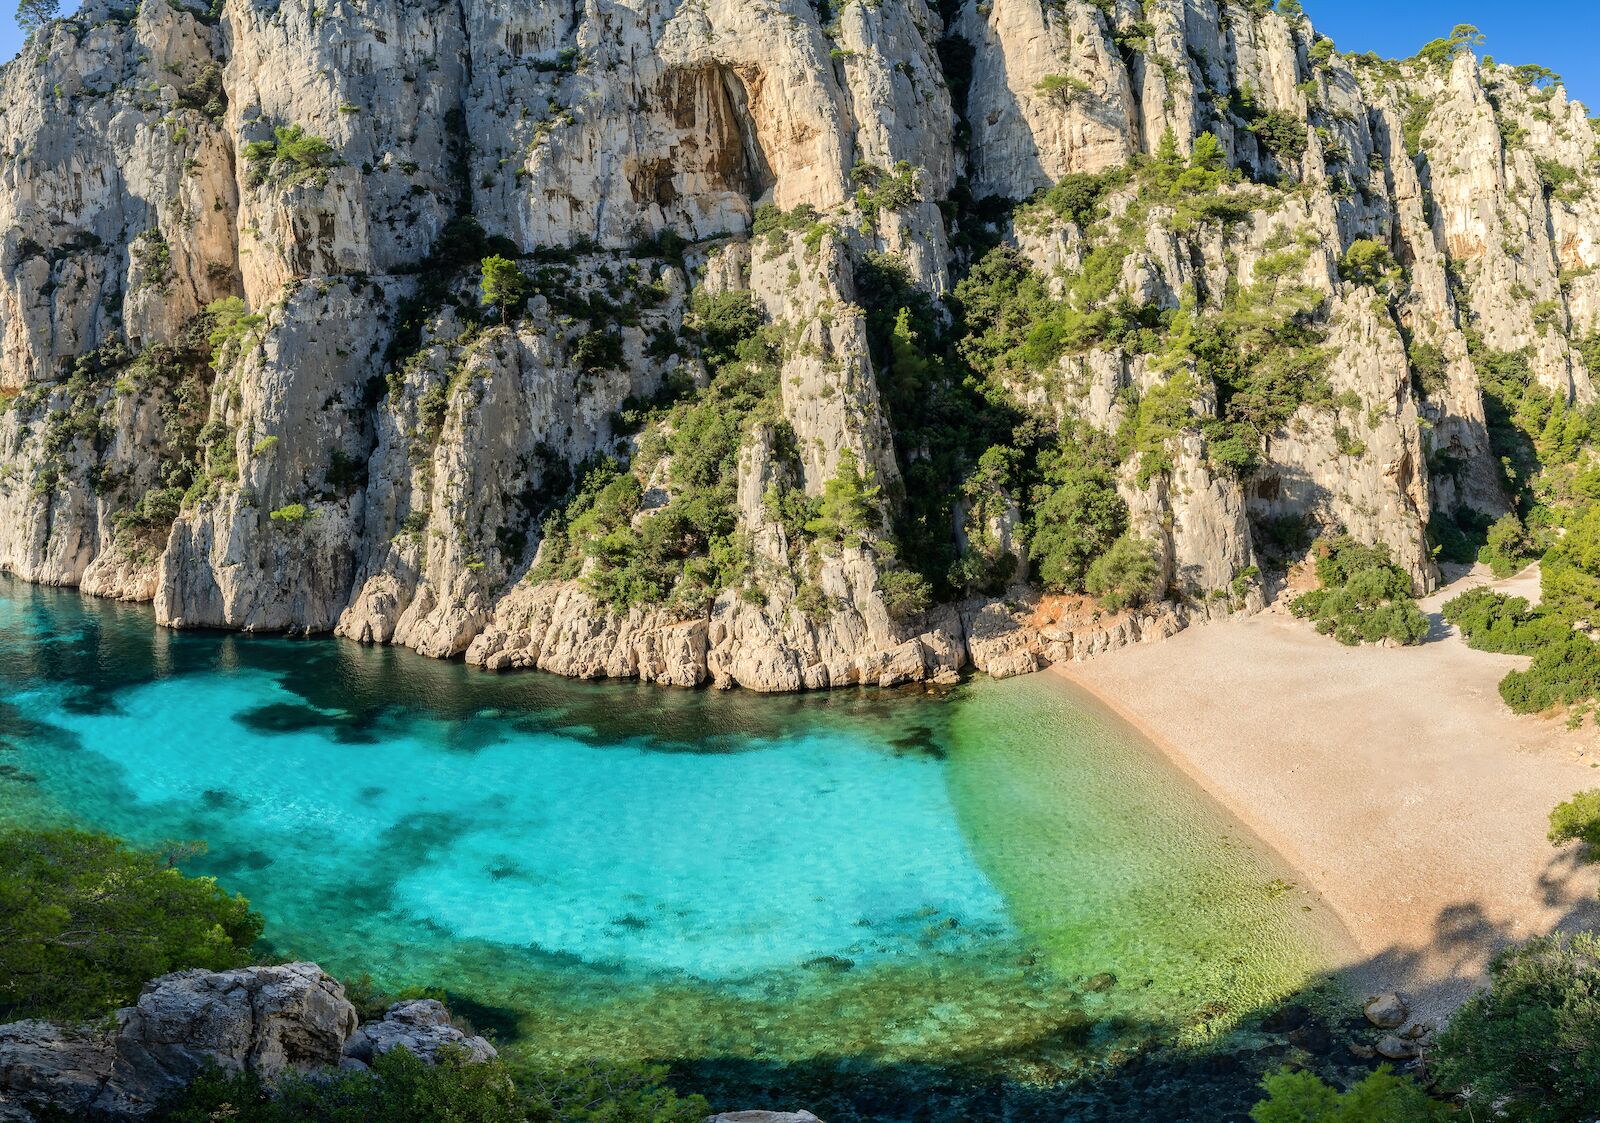 View of En-Vau calanque in Cassis, France